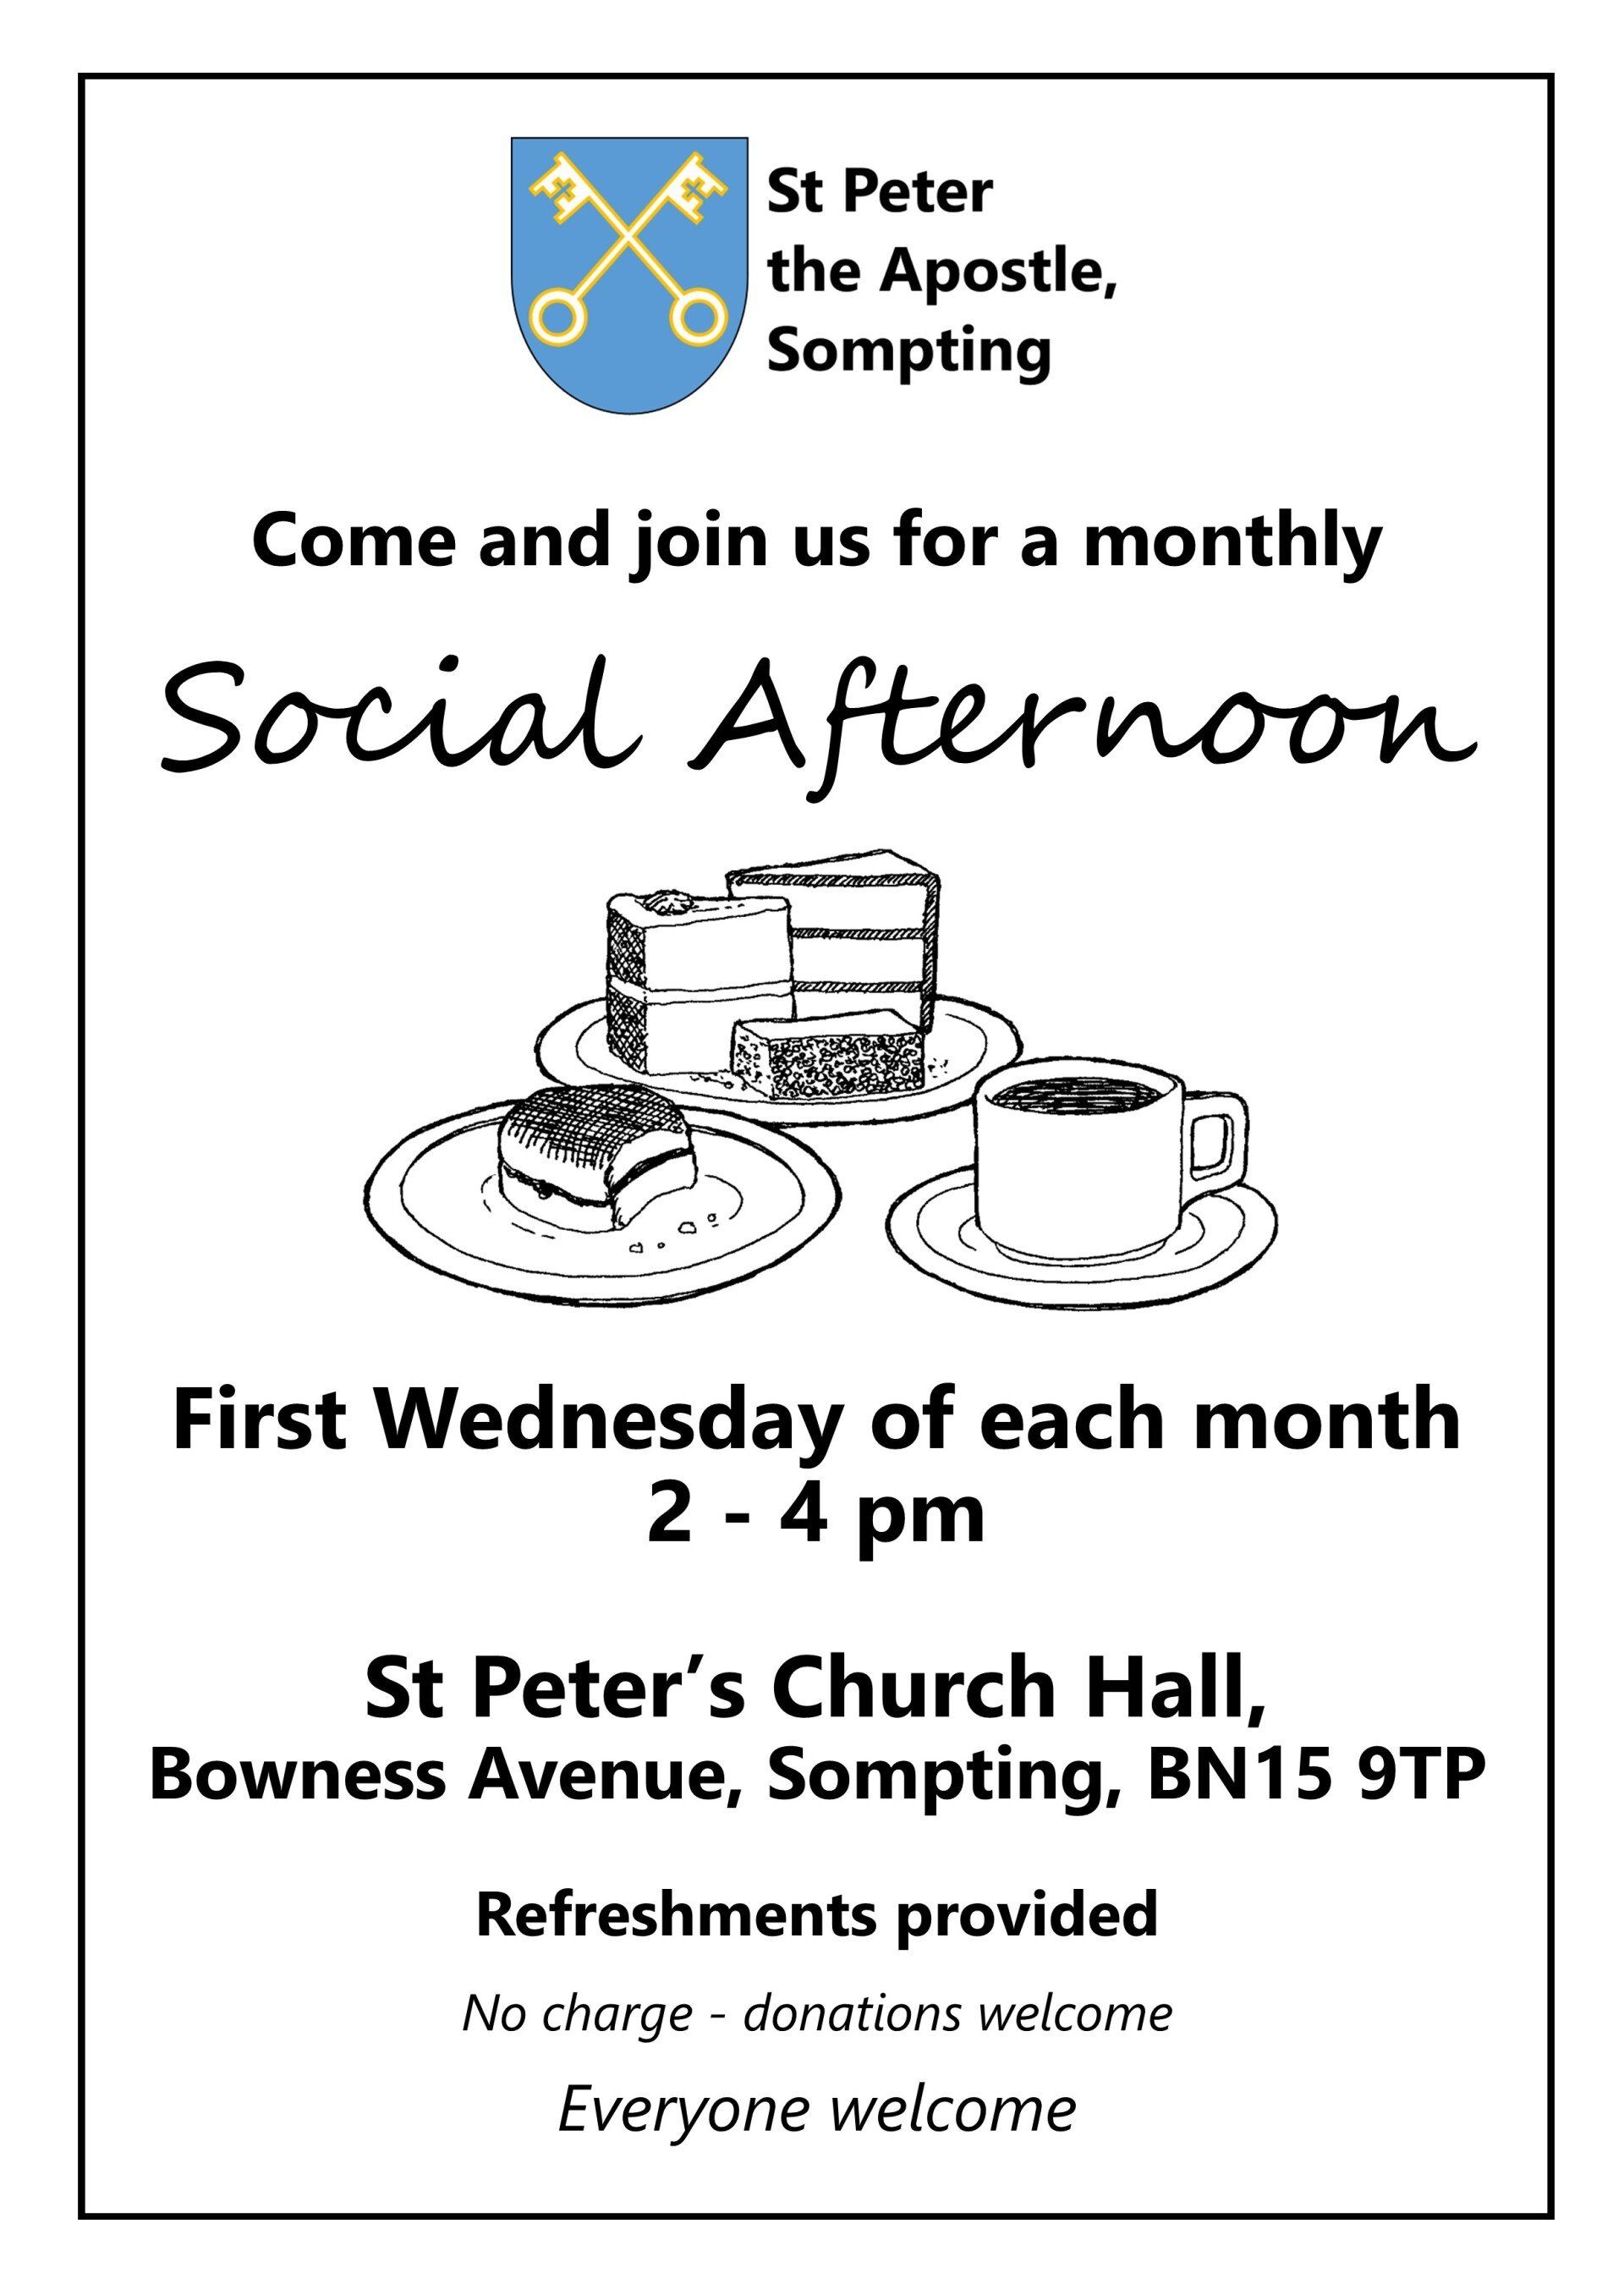 Social afternoon poster